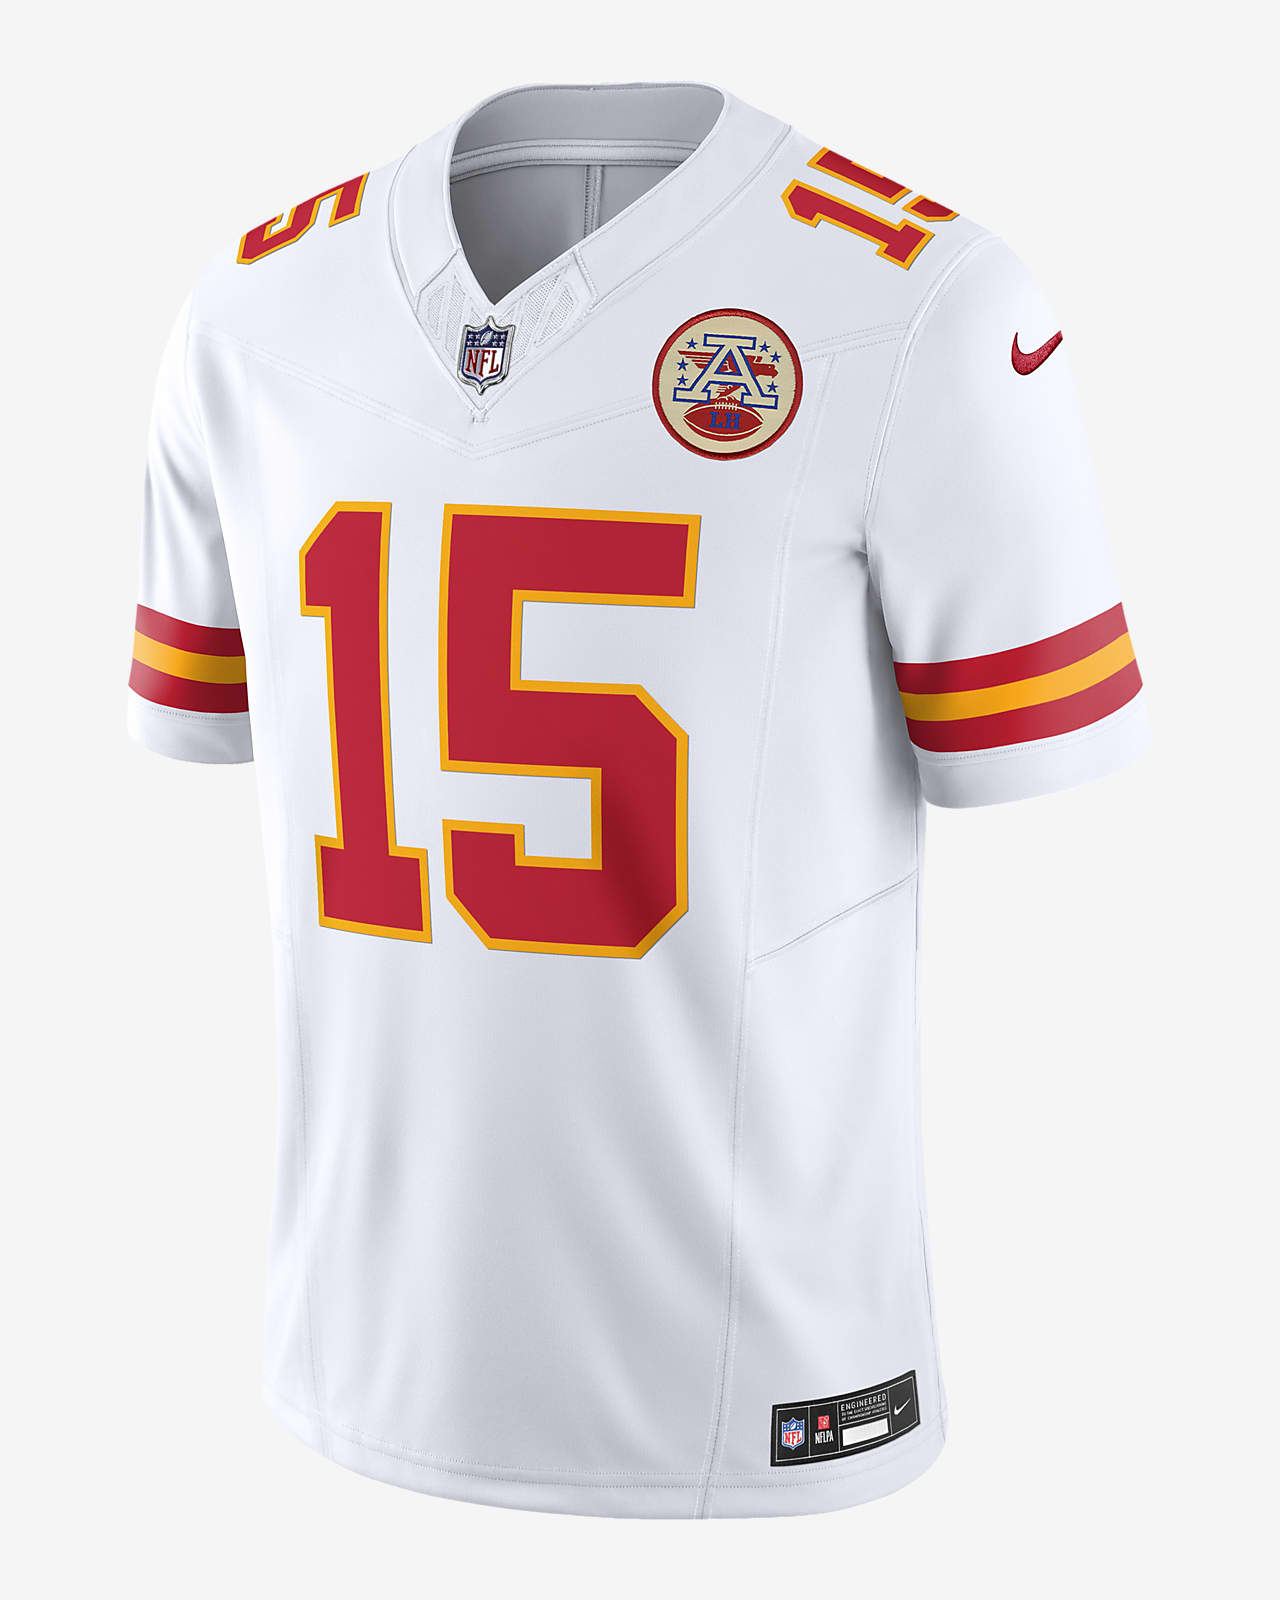 pictures of patrick mahomes jersey